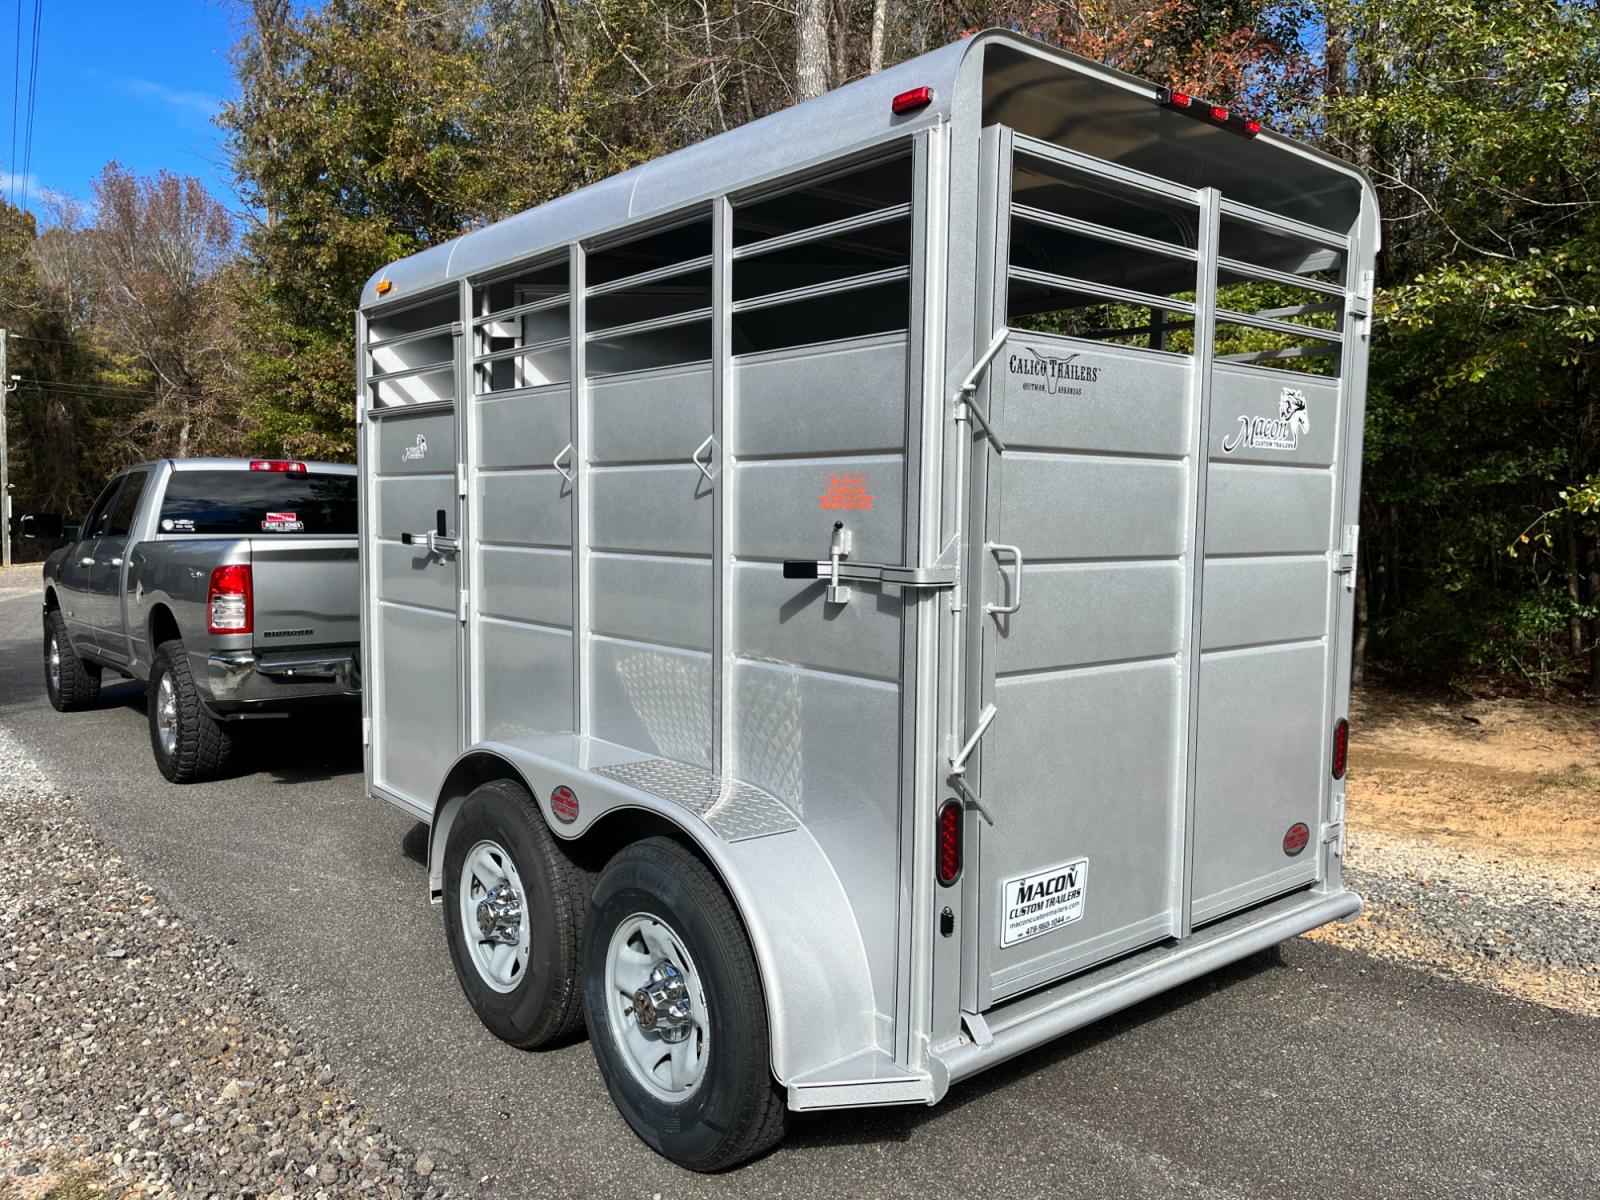 2023 Silver Metallic Calico 2 Horse Slant , located at 1330 Rainey Rd., Macon, 31220, (478) 960-1044, 32.845638, -83.778687 - Brand New 2023 Model 2 Horse Slant Calico Brand Trailer! 6ft Wide X 13ft Long Deluxe Model Tandem Axle Trailer! Easy Close Slant Divider Latch! 16" Radials! Beautiful Silver Metallic Paint is Awesome! Black Pin Striping Looks Fantastic! Fully Caulked Inside and Out to Prevent Rust! The Paint i - Photo #2